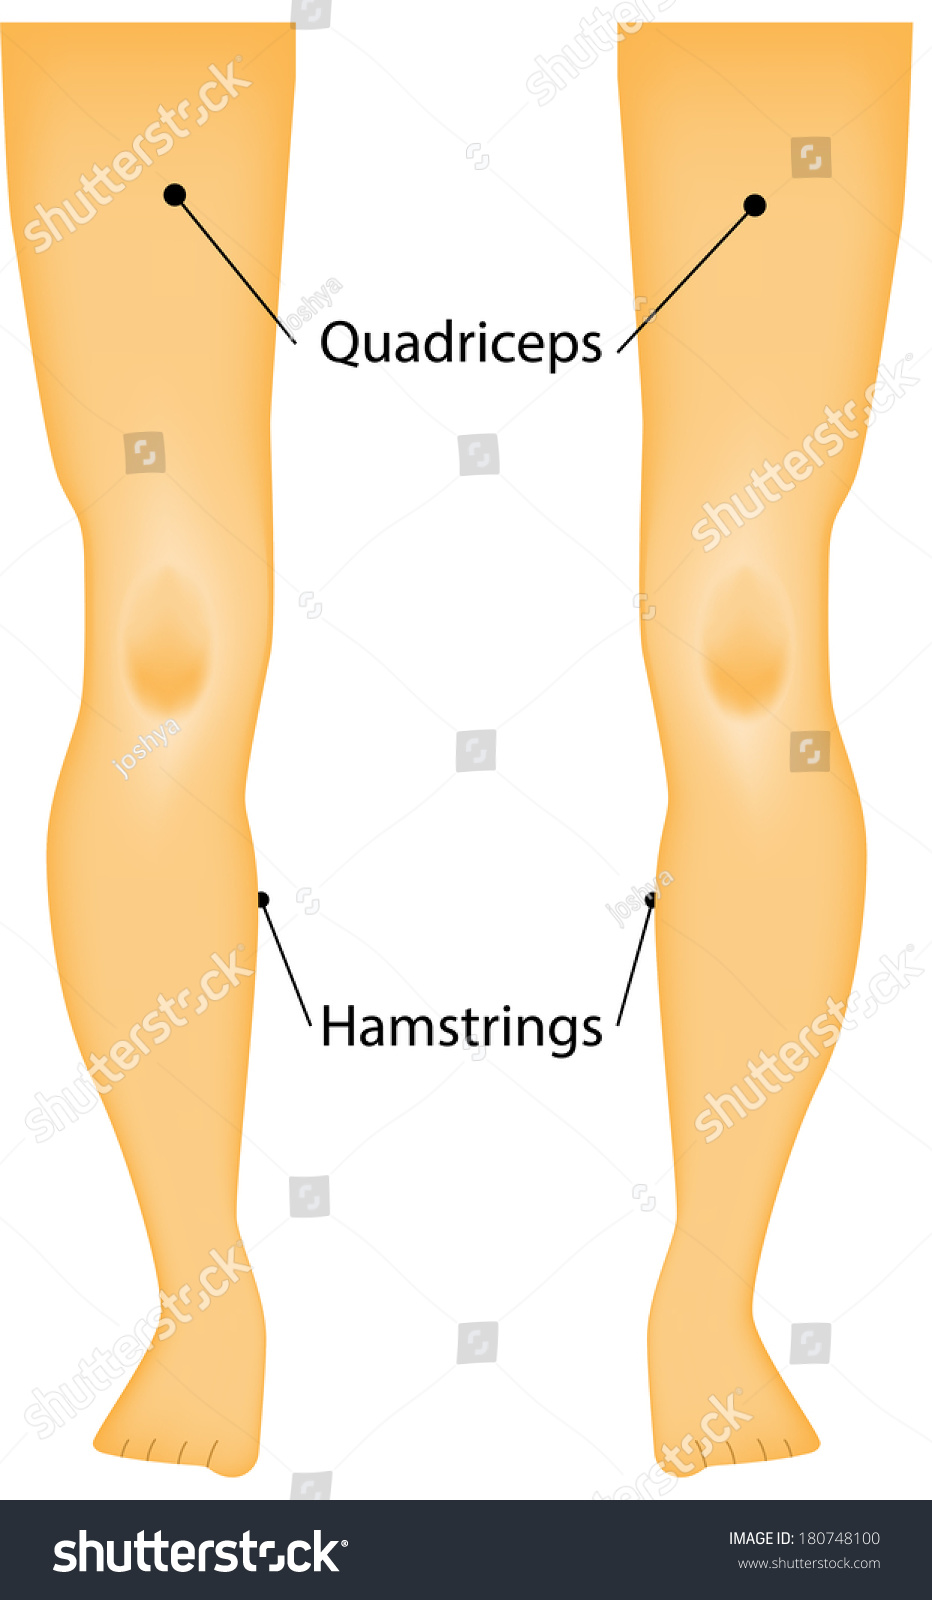 Labeled Muscles Of The Legs Diagram Stock Vector 180748100 : Shutterstock